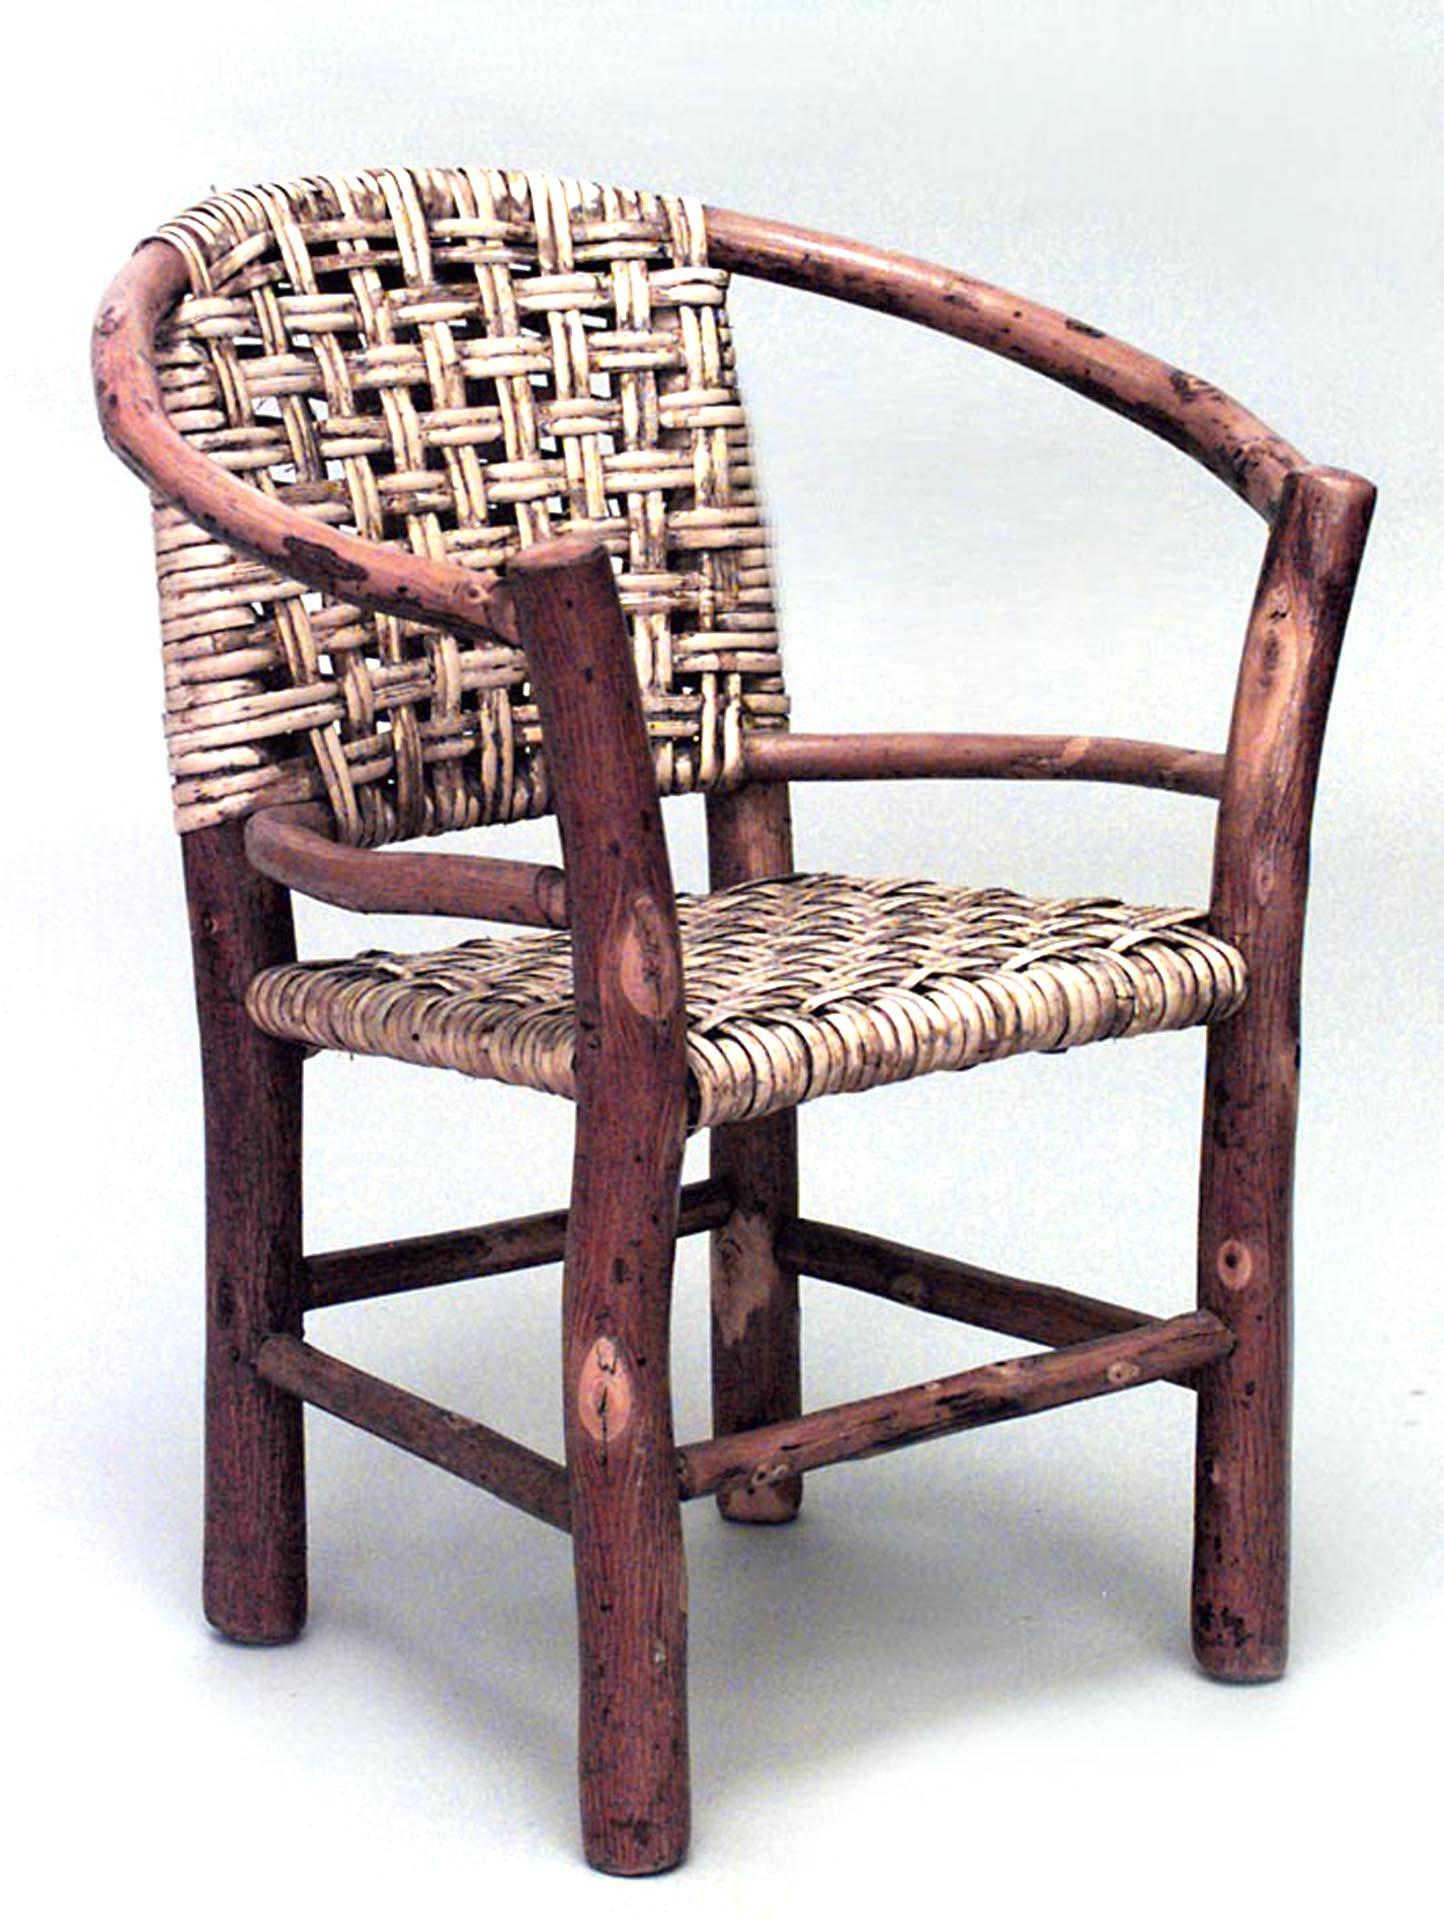 Set of 3 American Rustic Old Hickory (1930s) miniature salesman's sample salon set with woven seat and round back design (loveseat, rocking chair, arm chair)
